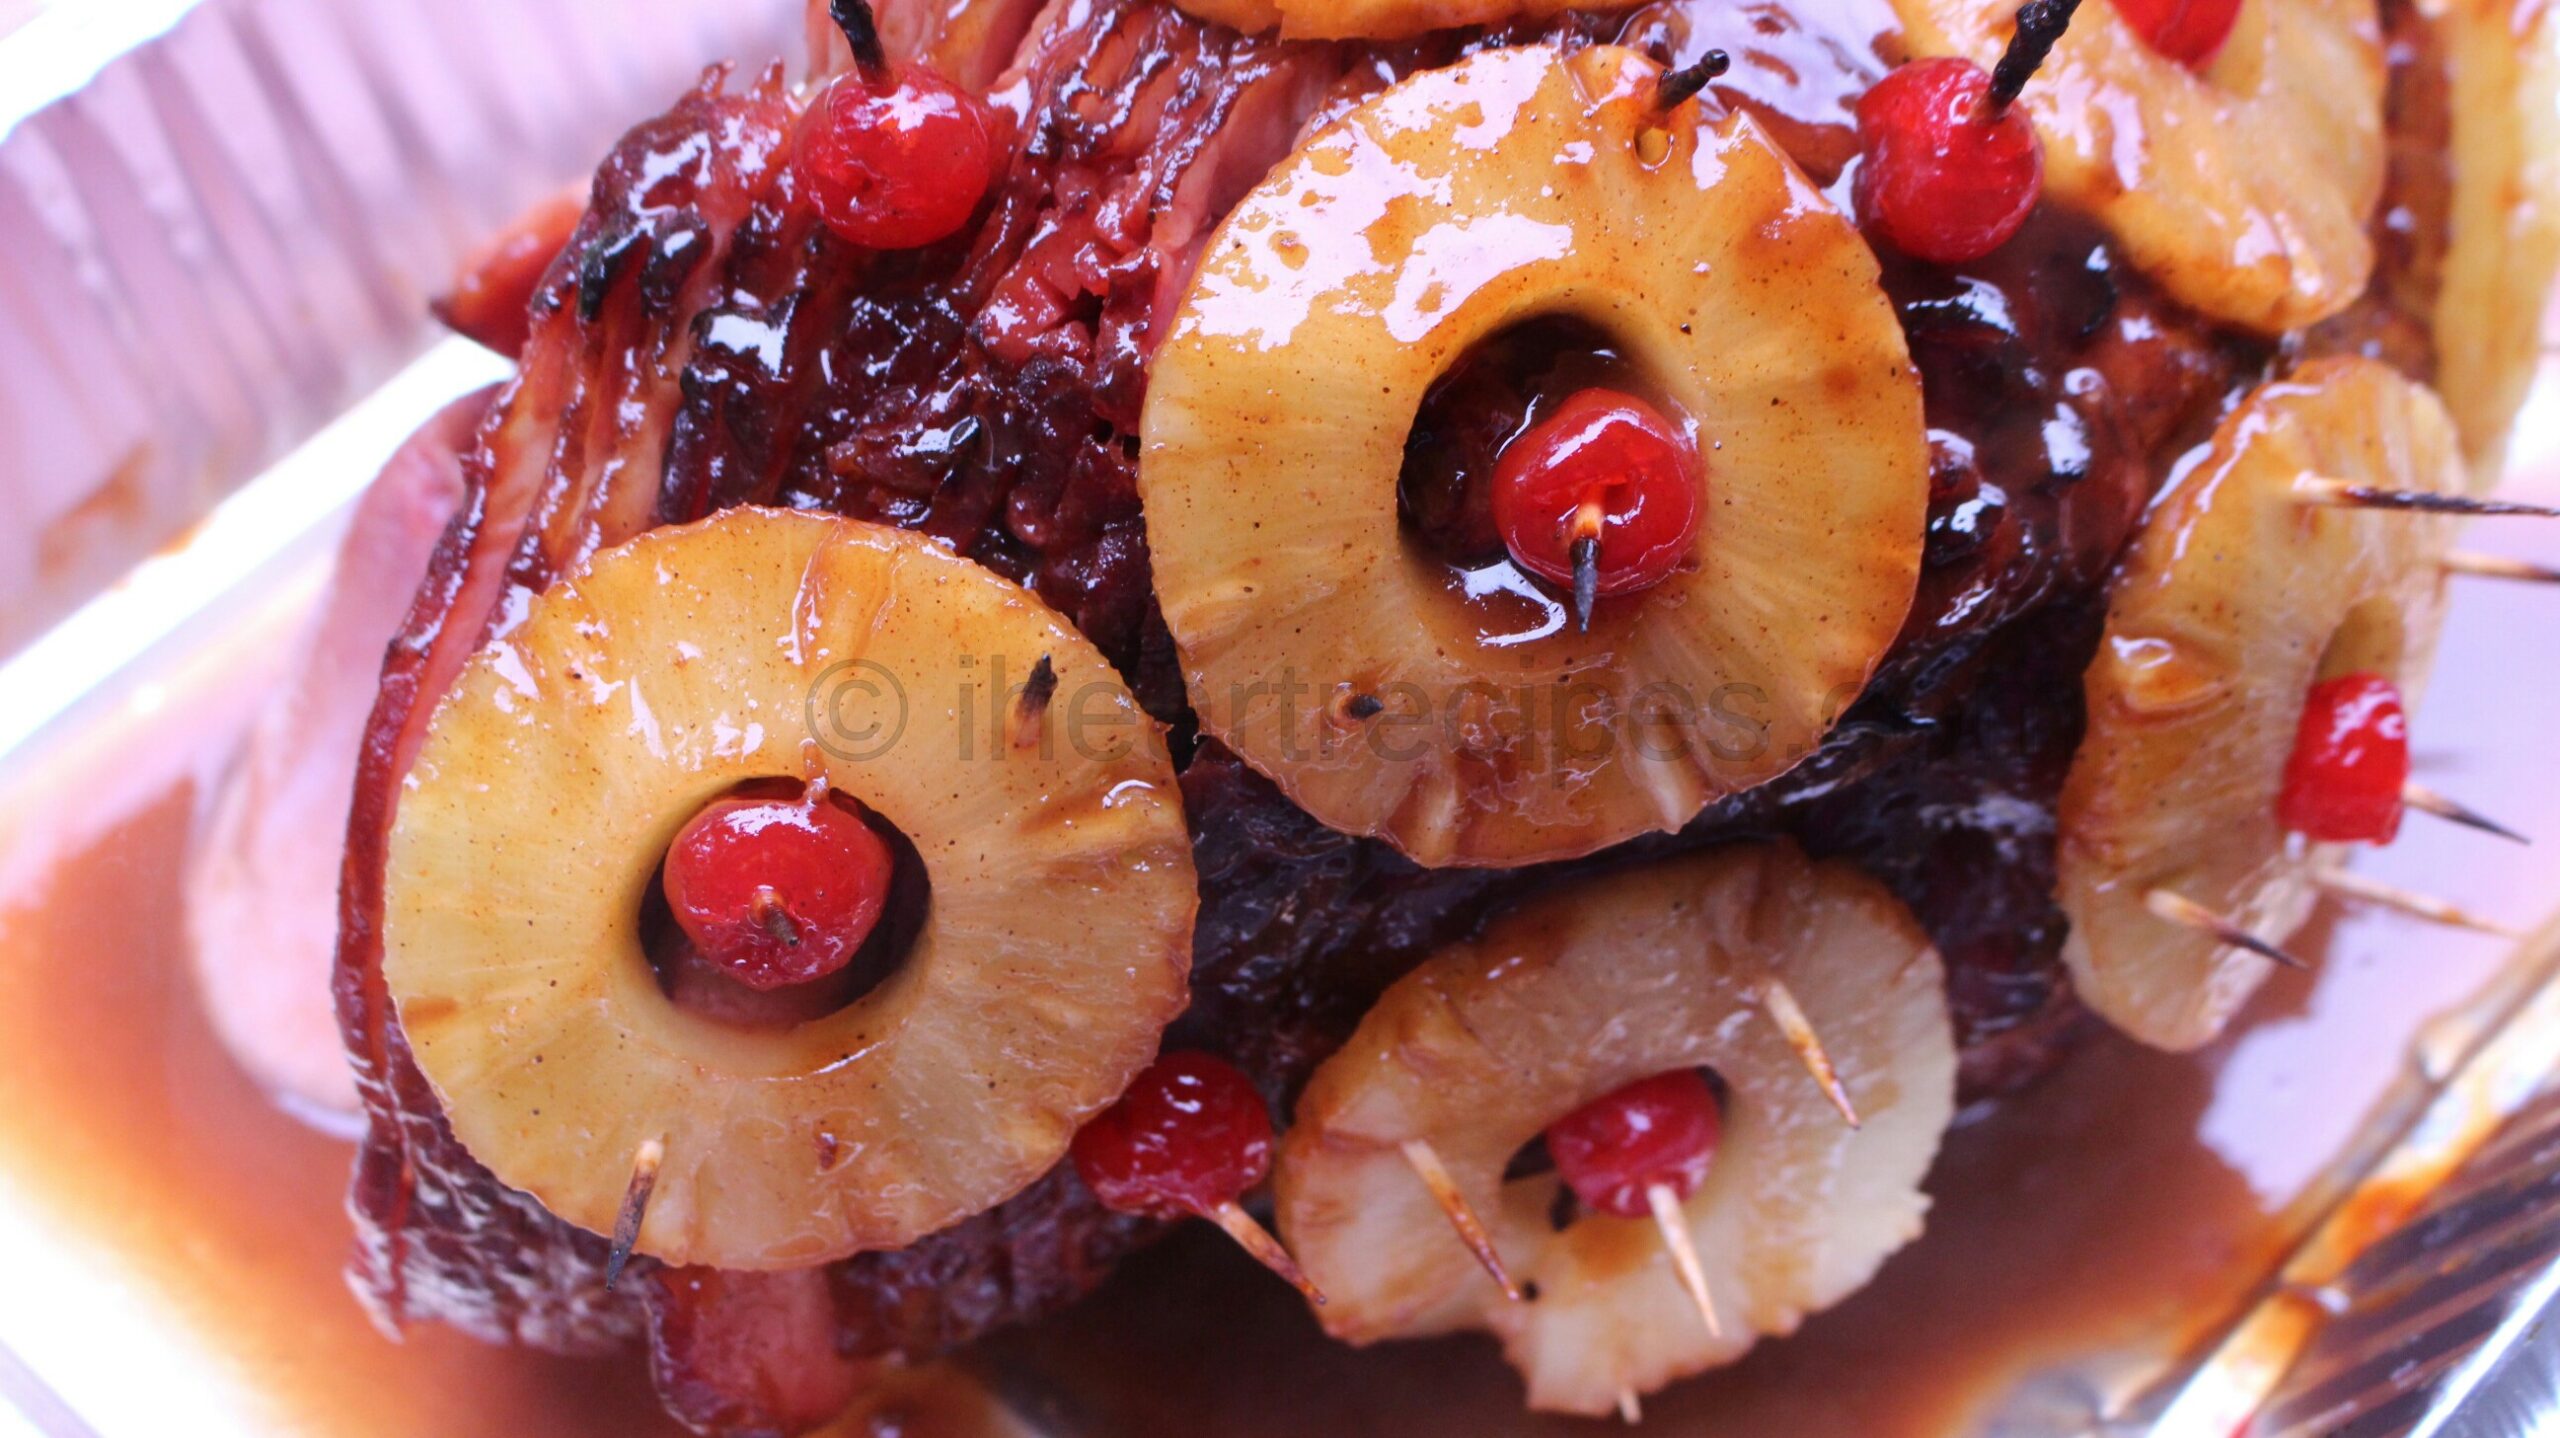 A close up image of a baked spiral ham garnished with pineapple rings and cherries, glazed with a sweet pineapple brown sugar sauce.